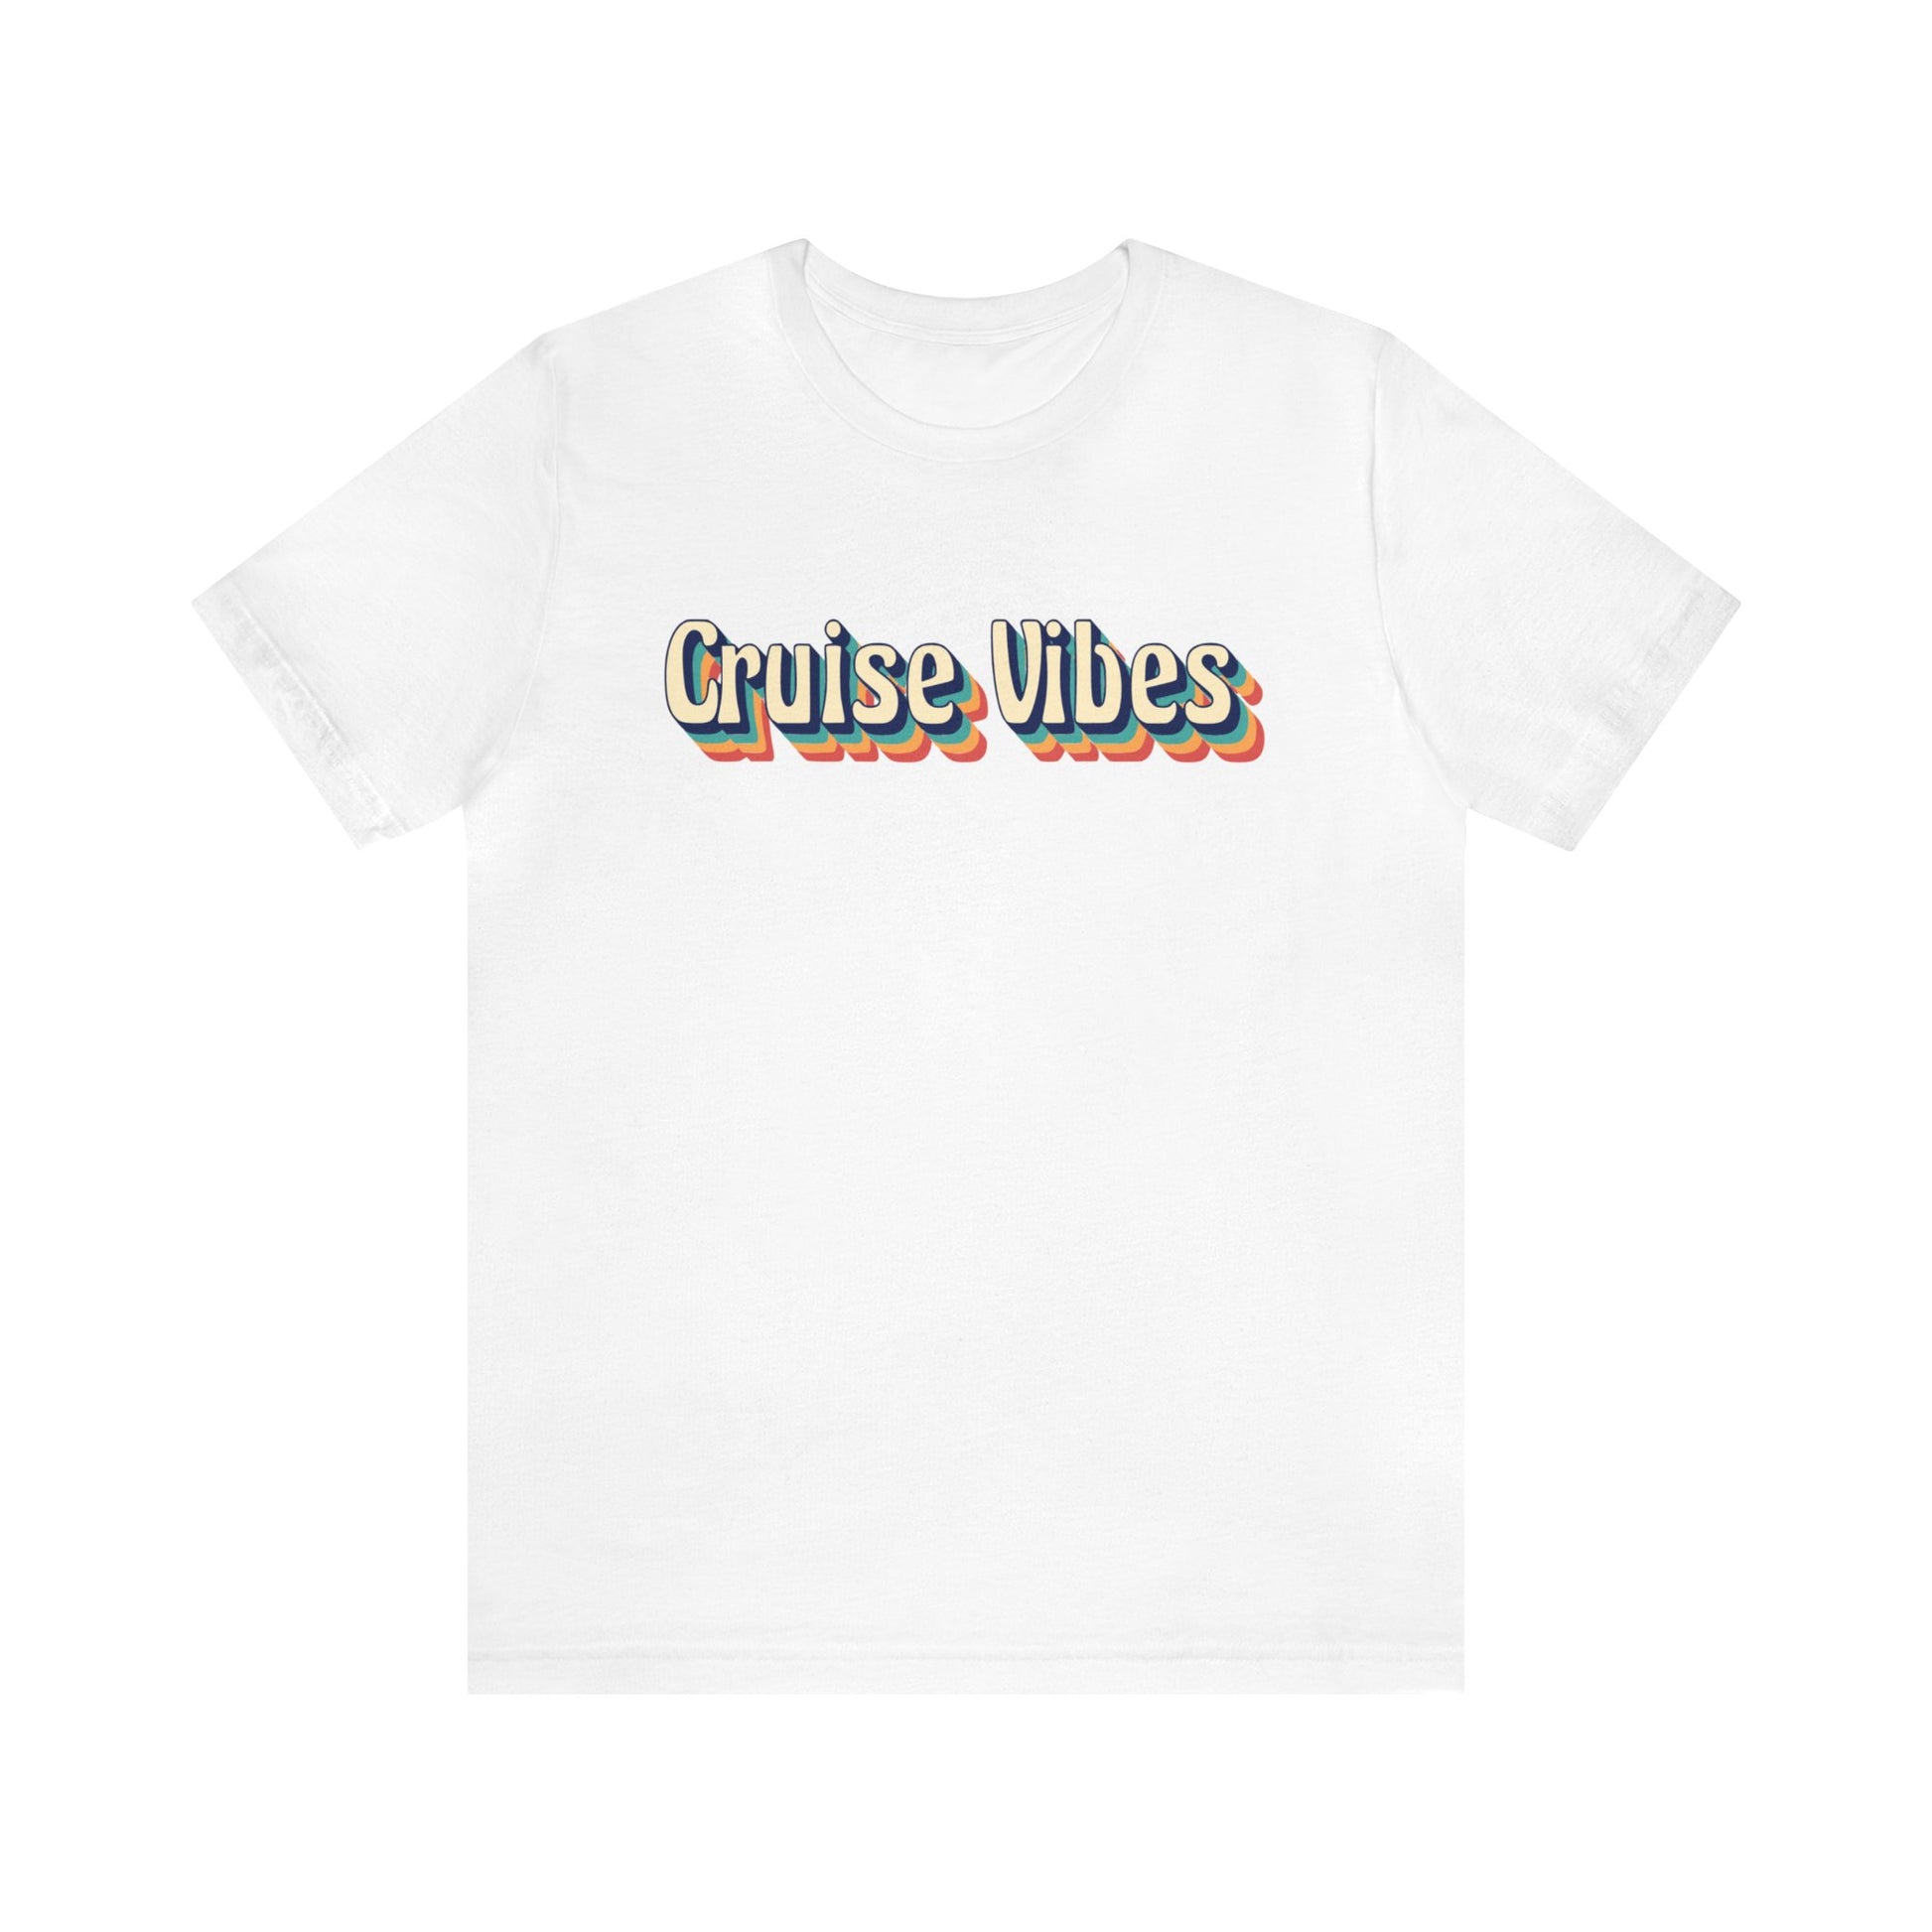 Cruise Vibes Shirt in White